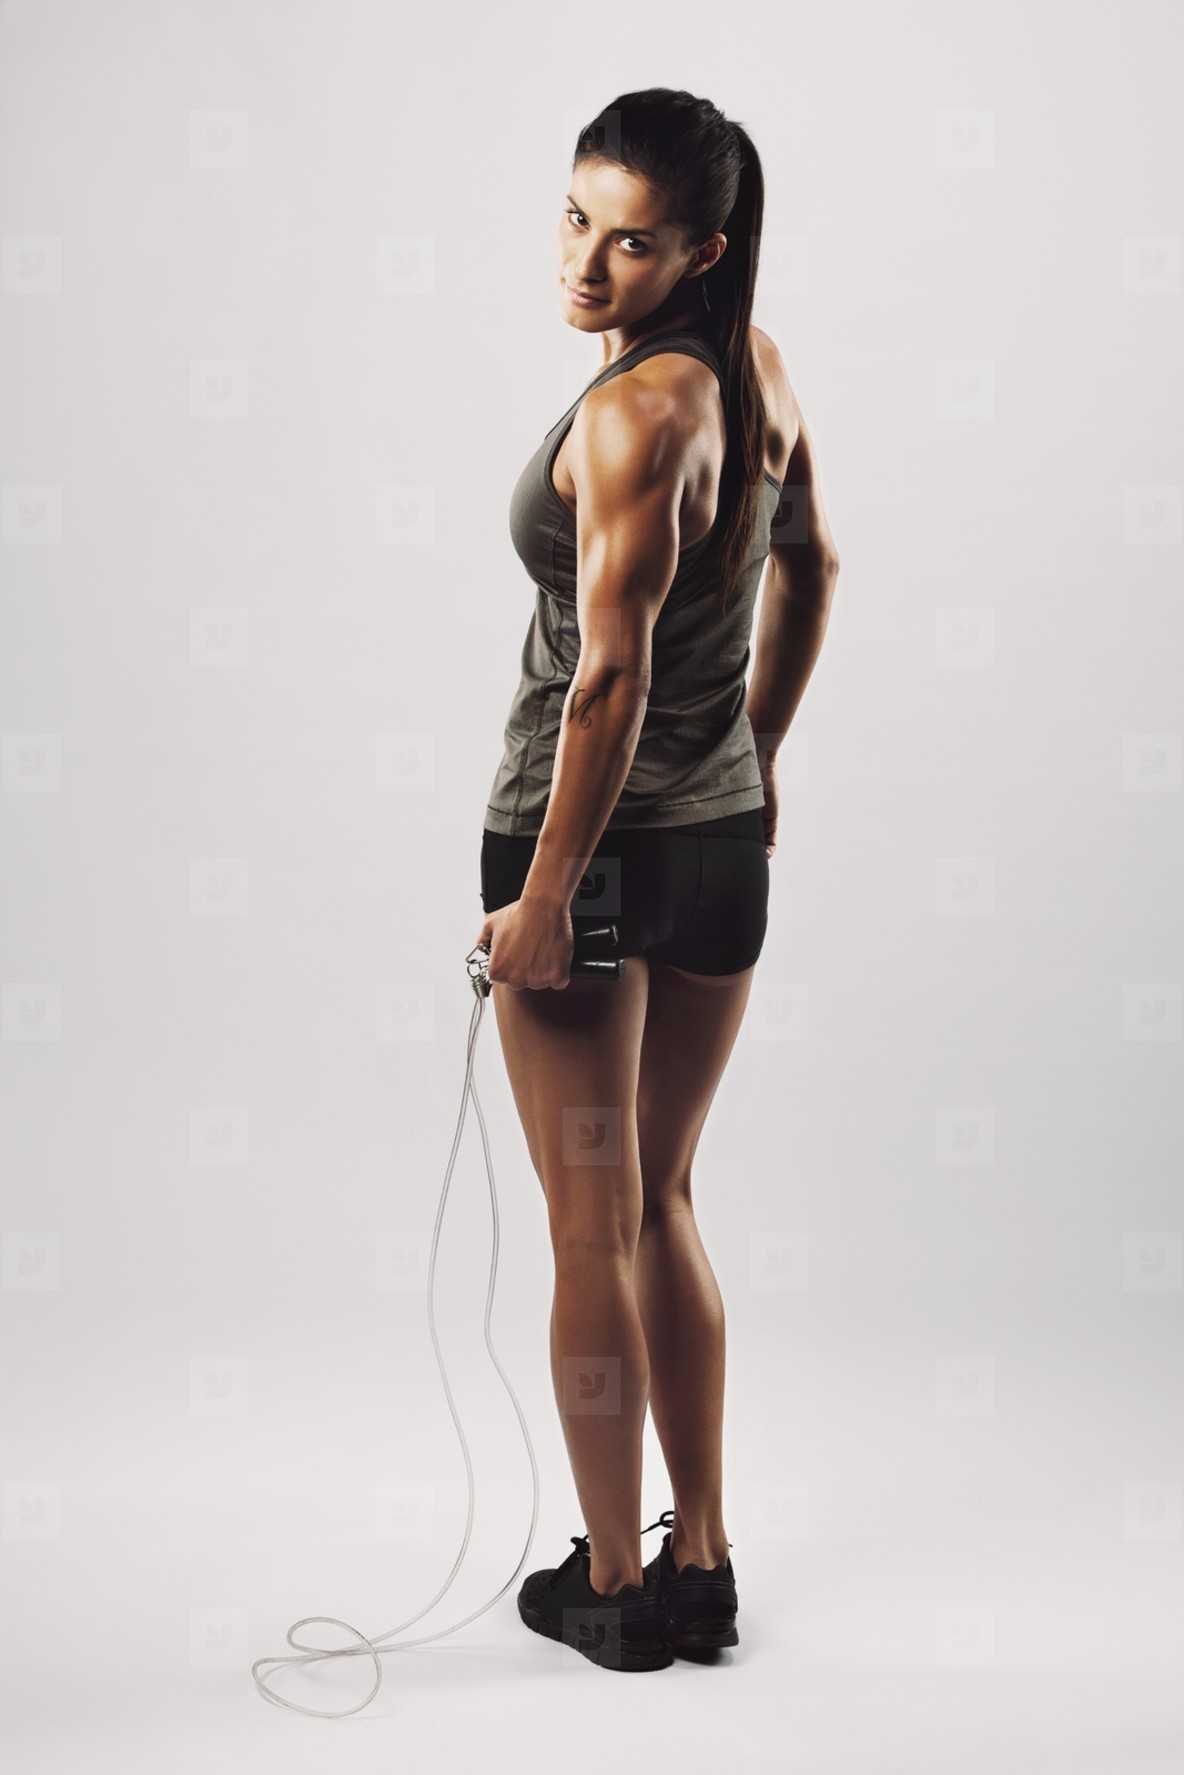 Photos - Fitness woman posing with skipping rope - YouWorkForThem